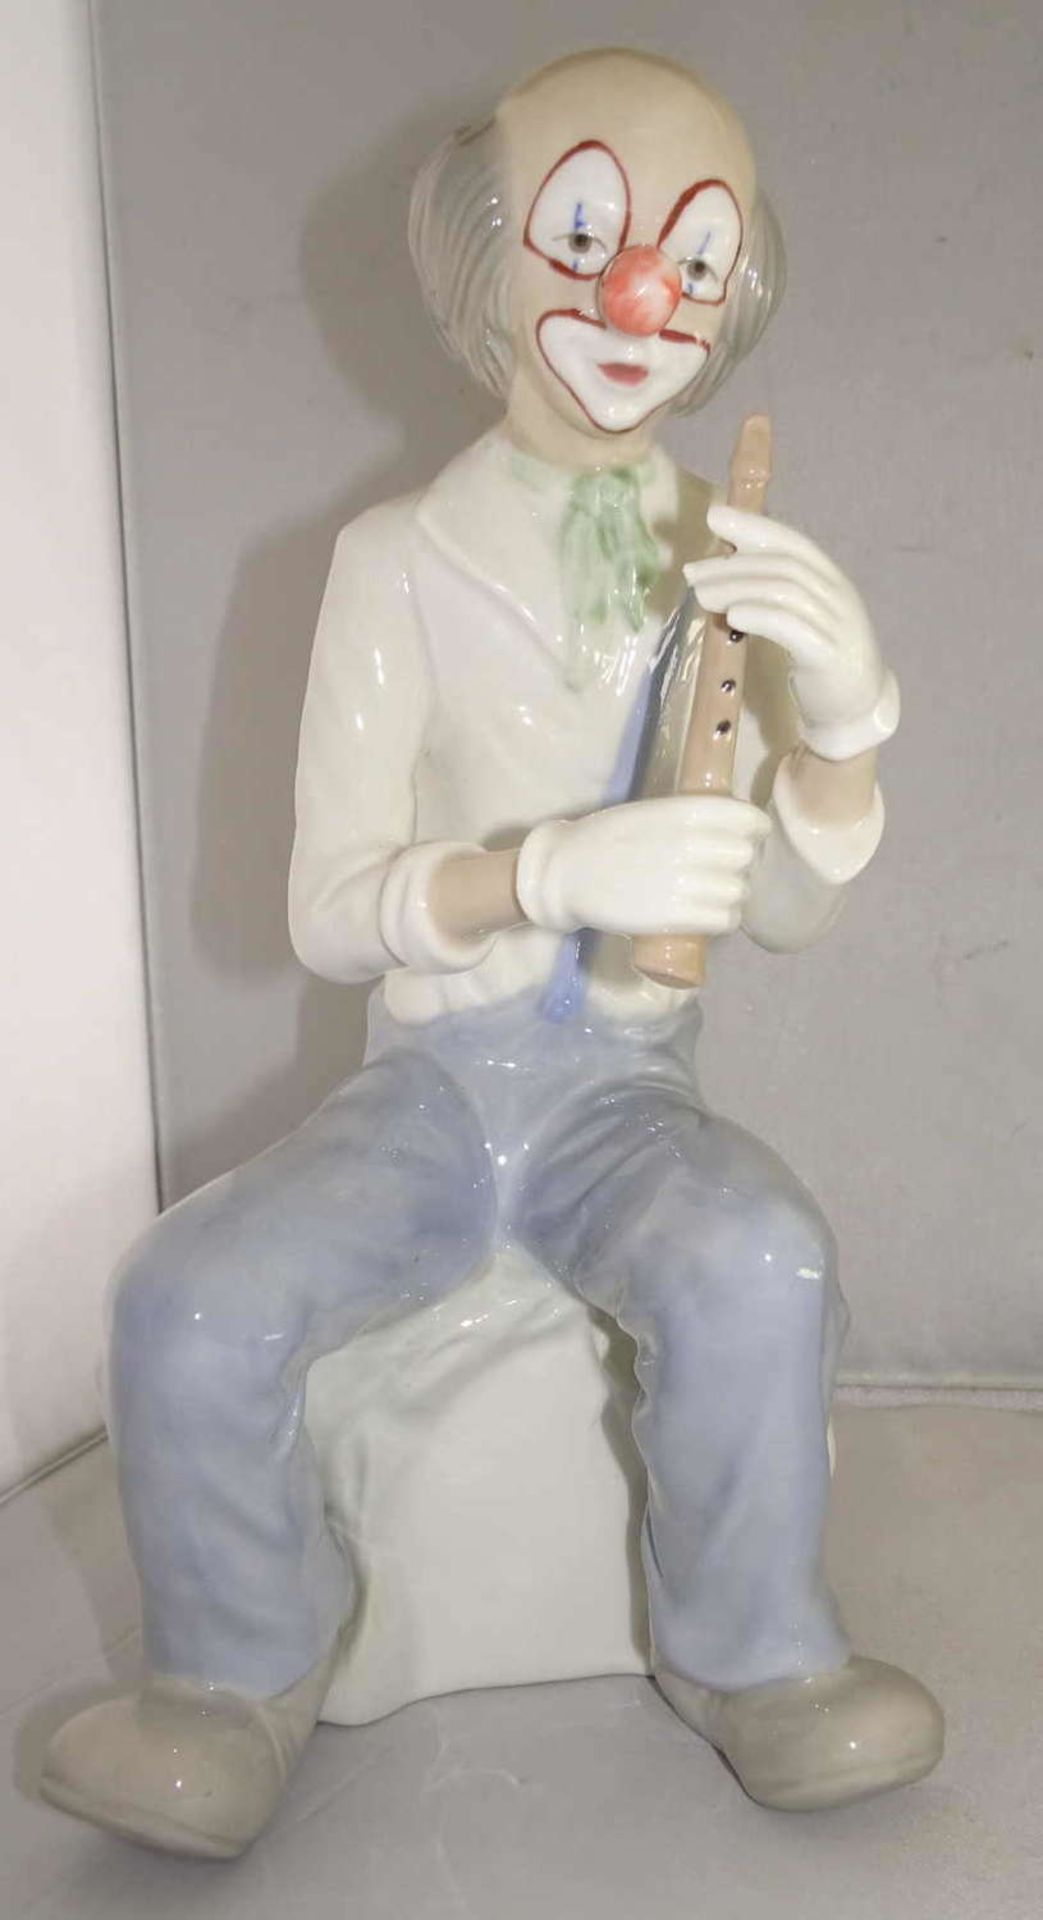 Porcelain figurine Tengra, hand made in Spain, Valencia. Clown with flute in hand. Marked with